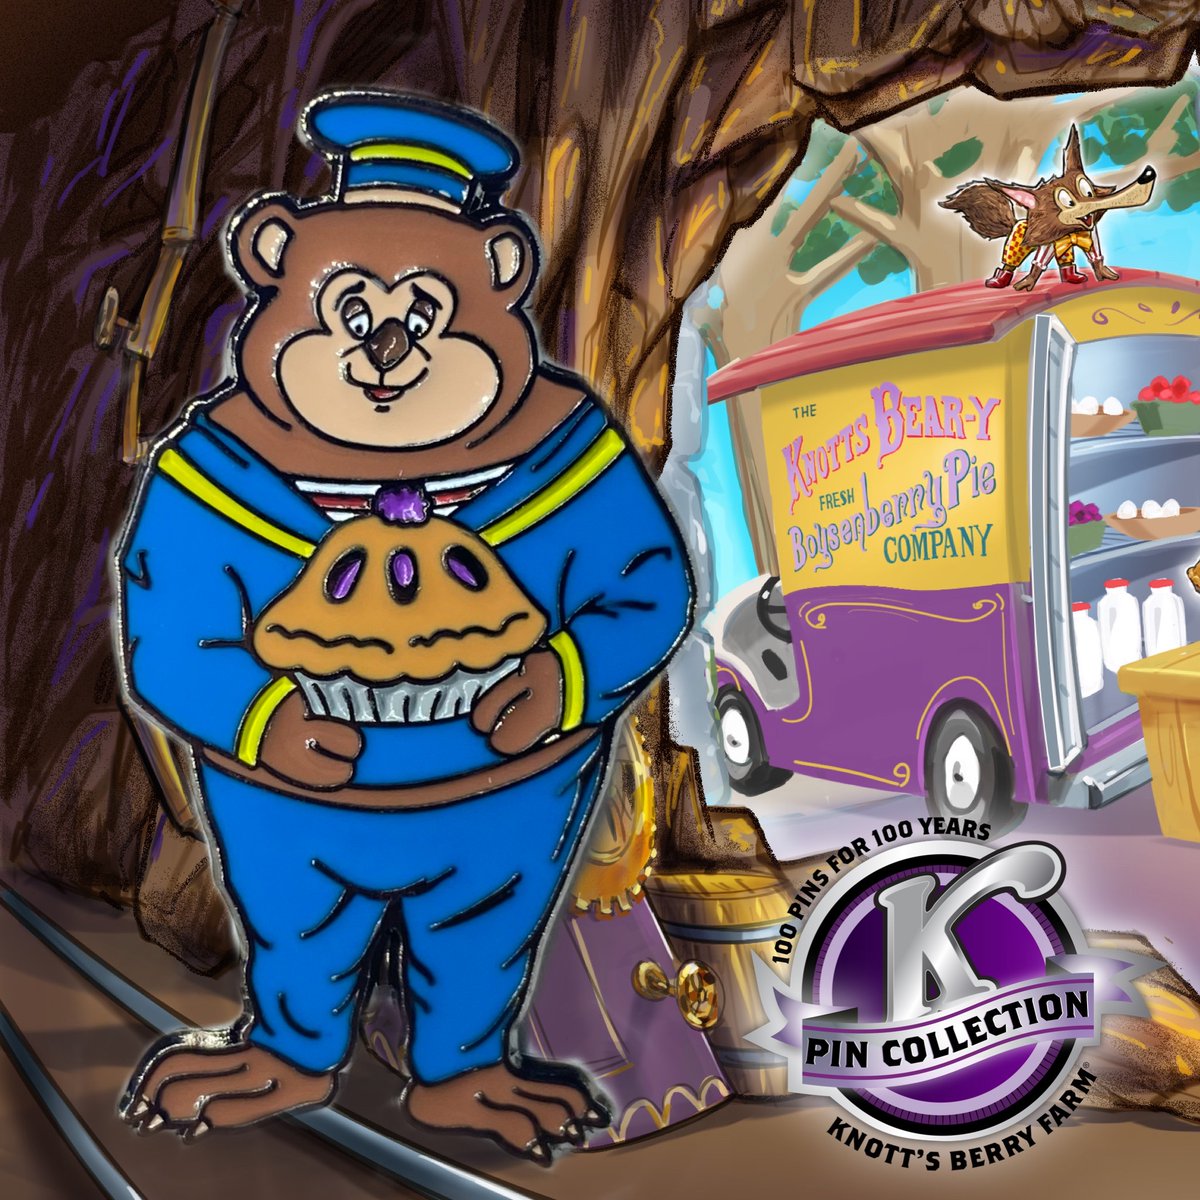 Knott S Berry Farm On Twitter Knott S Bear Y Tales Return To The Fair Finds Our Resident Bears Still Working At The Pie Factory This Brand New Collector Pin Features Boysen Beary Knott S 100th Series - roblox farm world bear